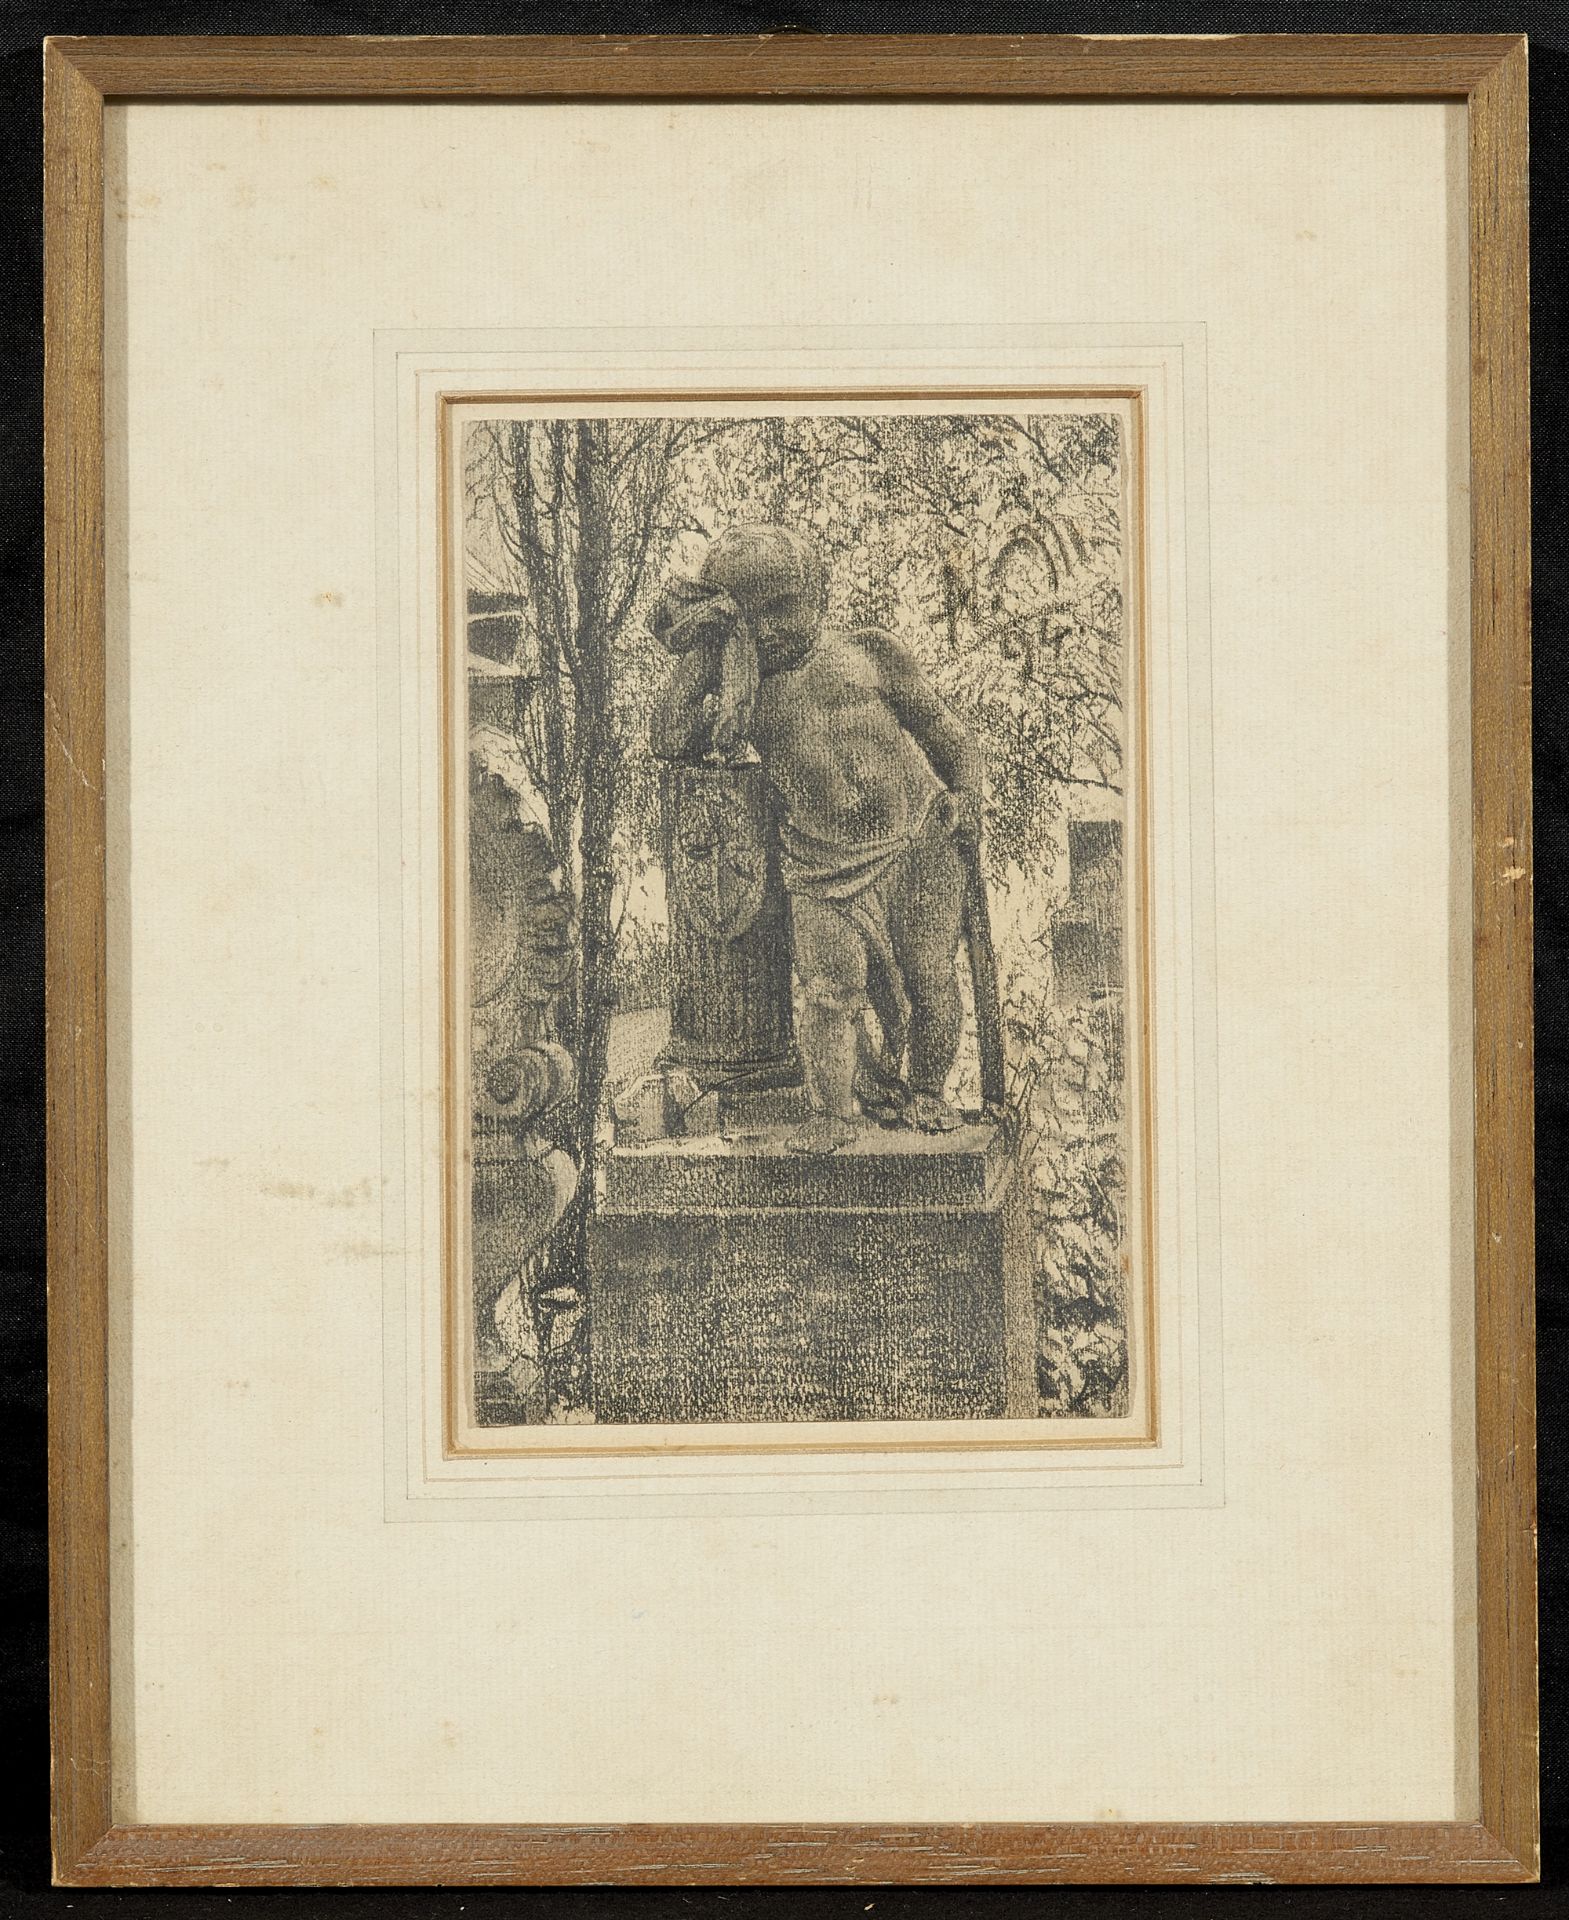 Adolph von Menzel, Putto from the Grave of Prince Frederick William in Potsdam - Image 3 of 3